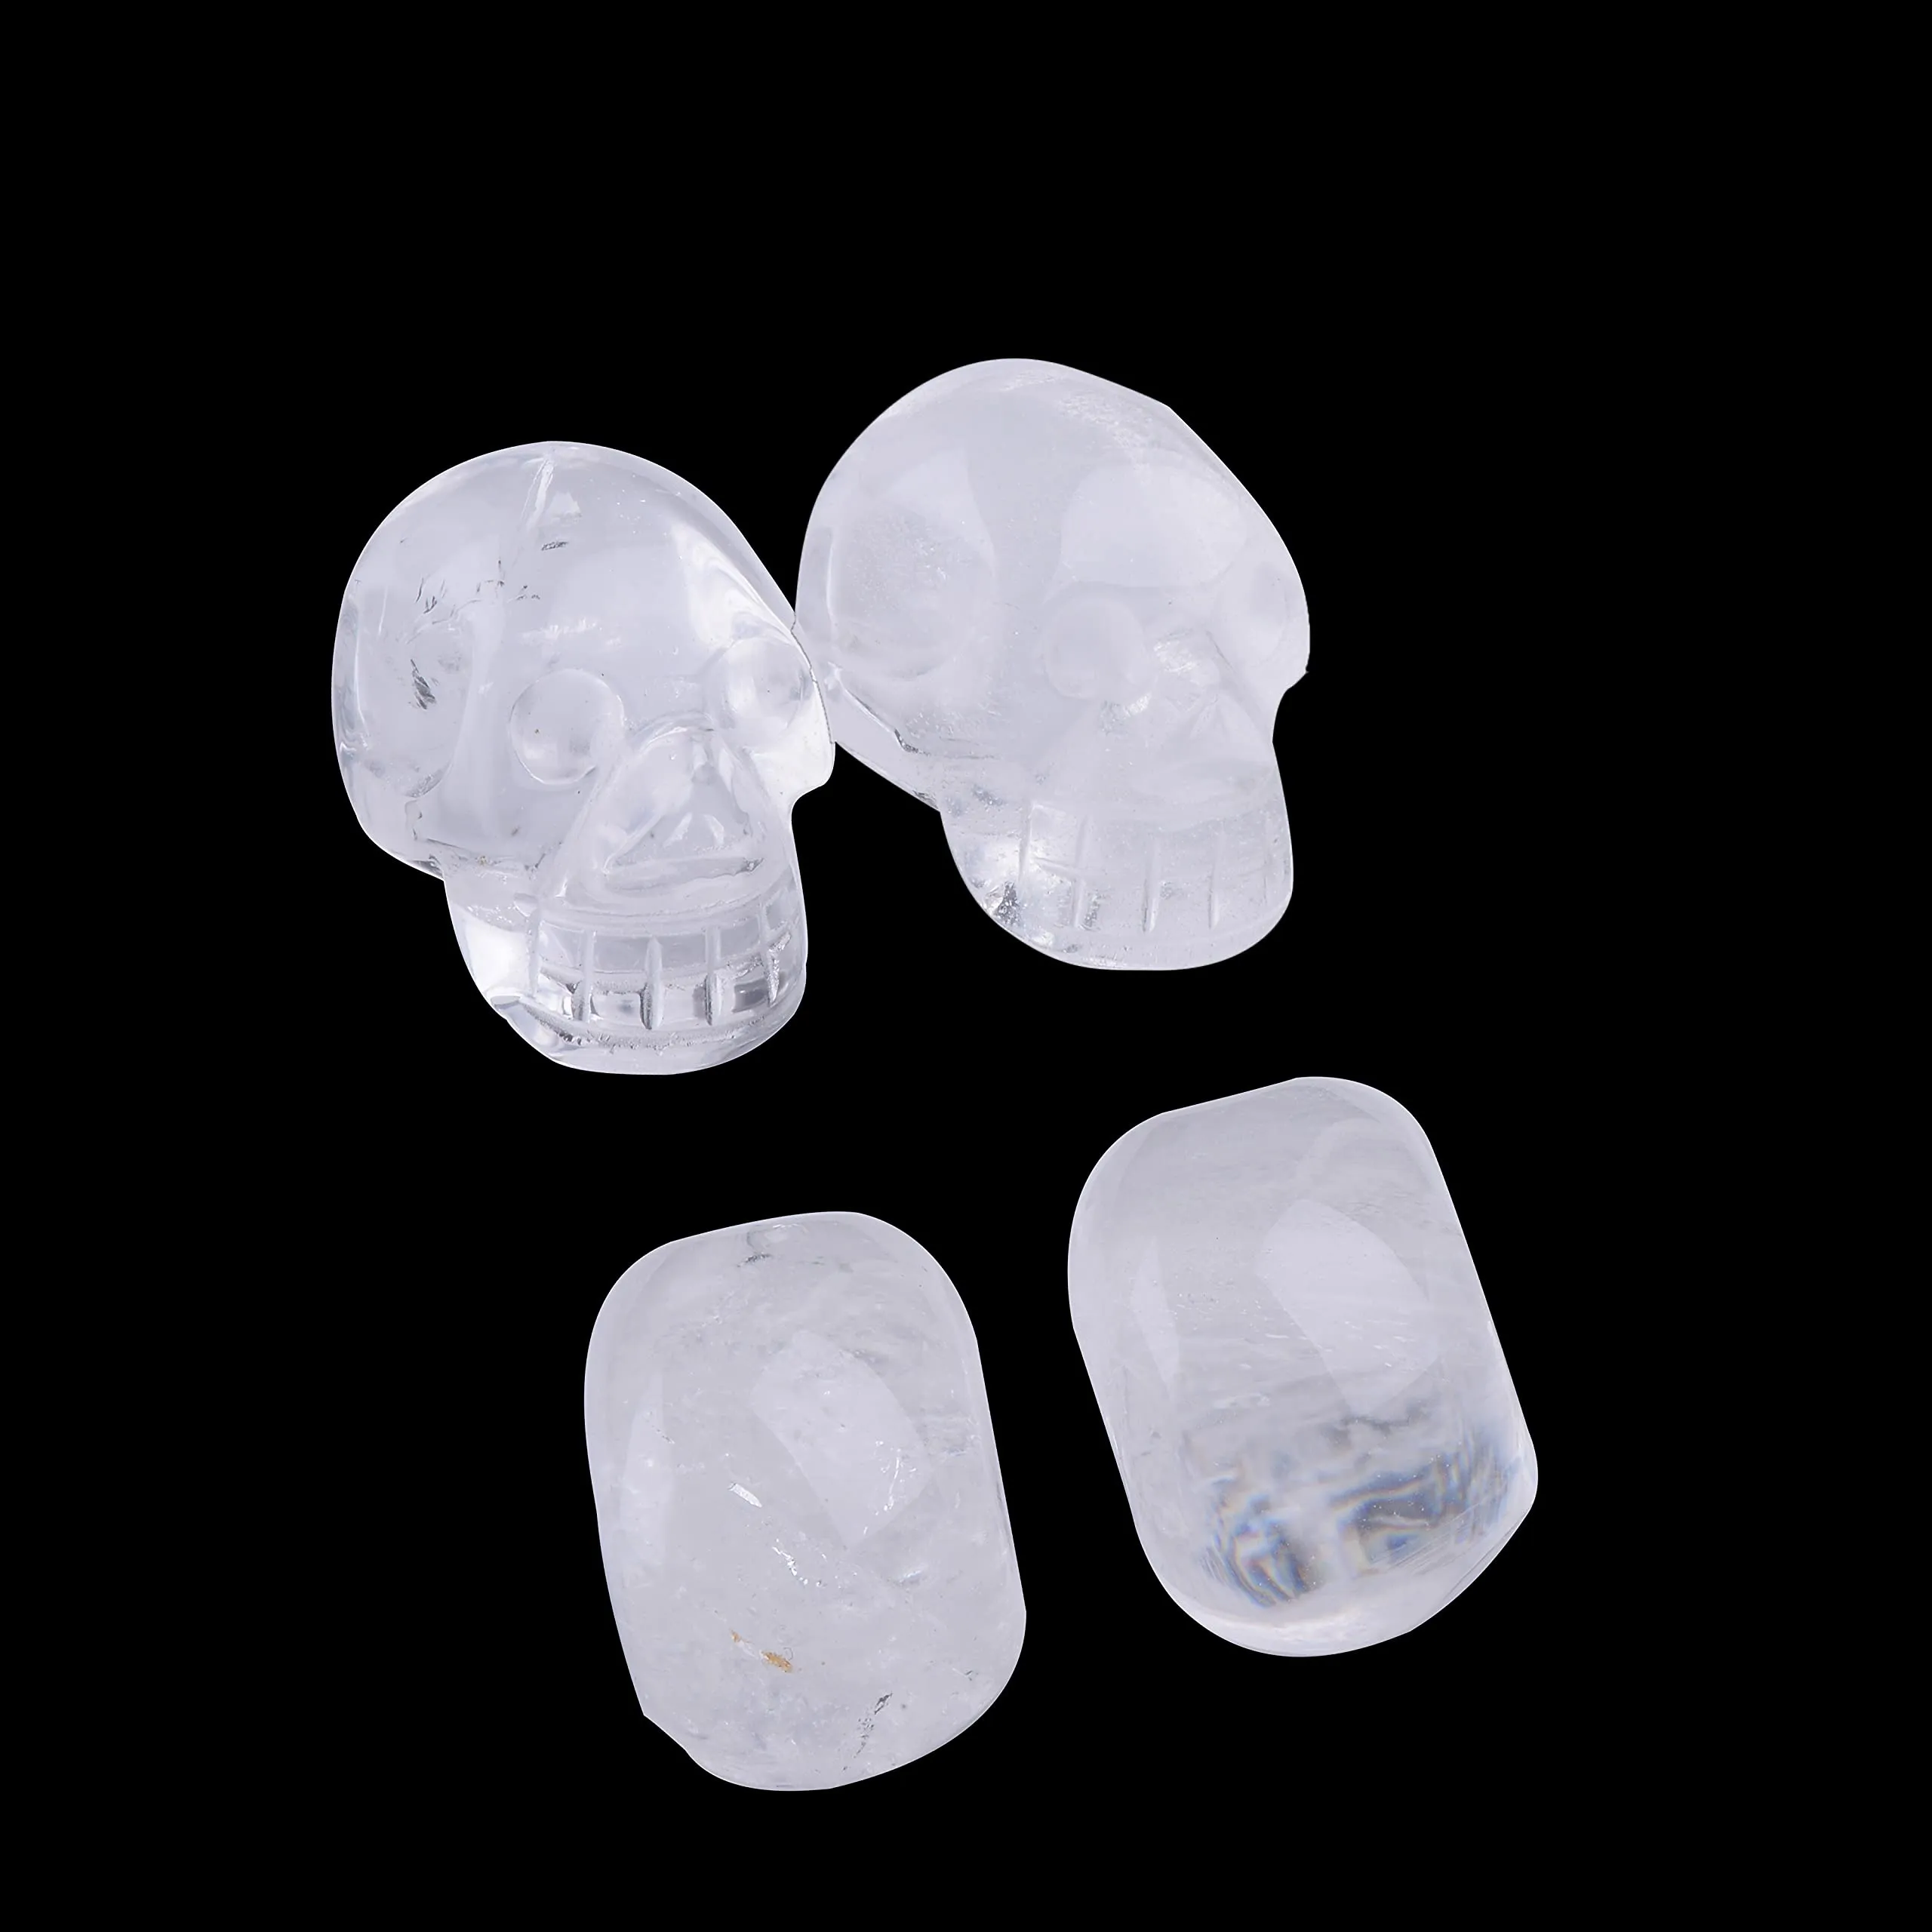 clear quartz crystal skull collectible figurines human skull statue hand carved mini 1 5